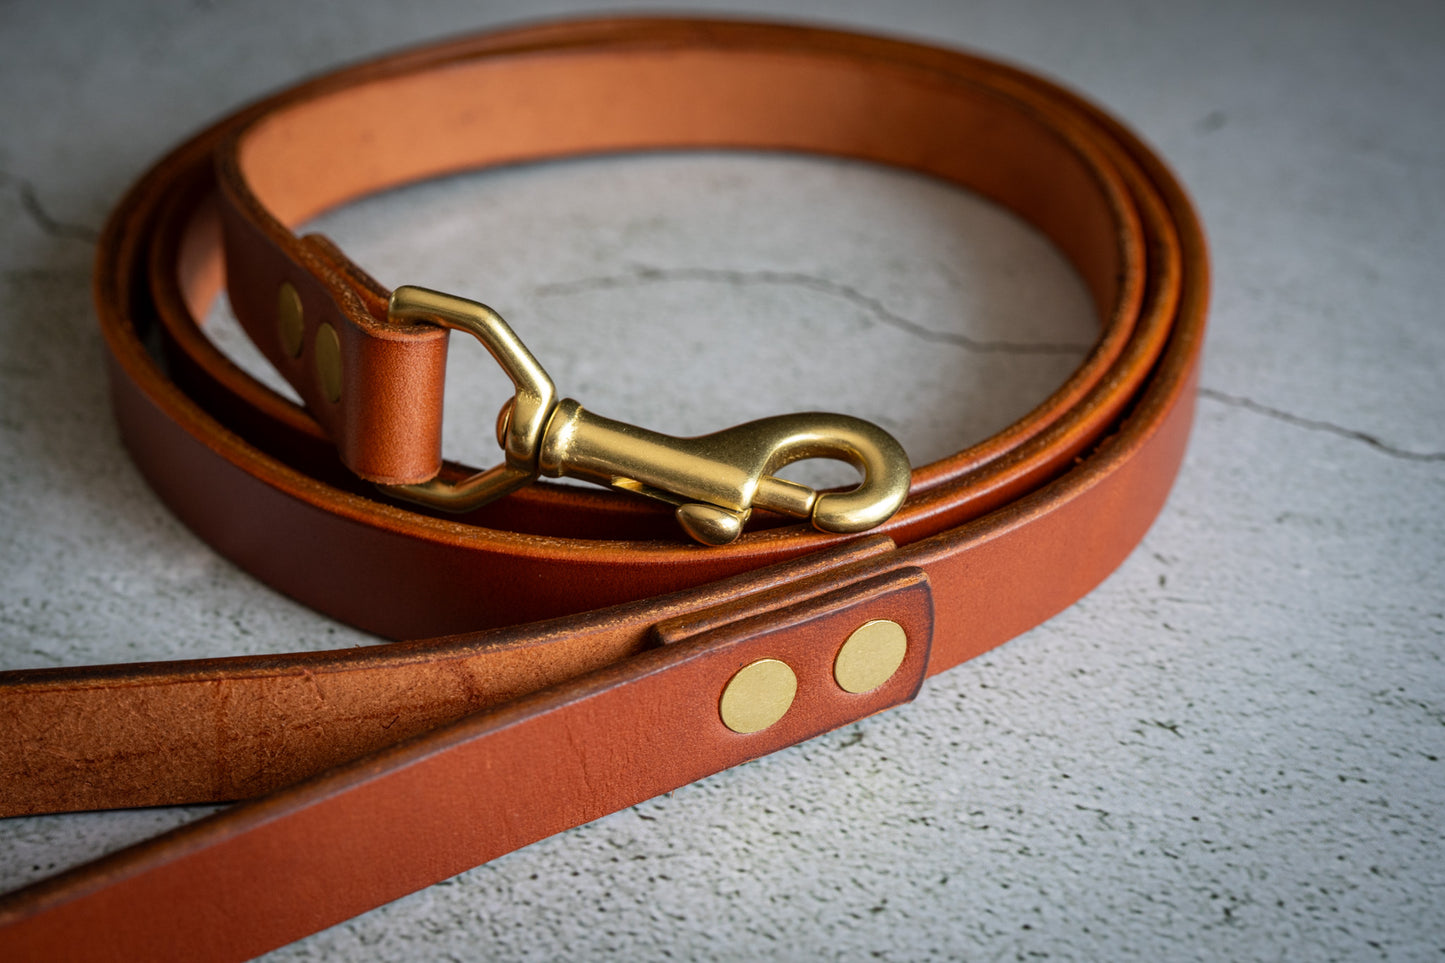 Brown leather dog leash with copper-colored metal clip.